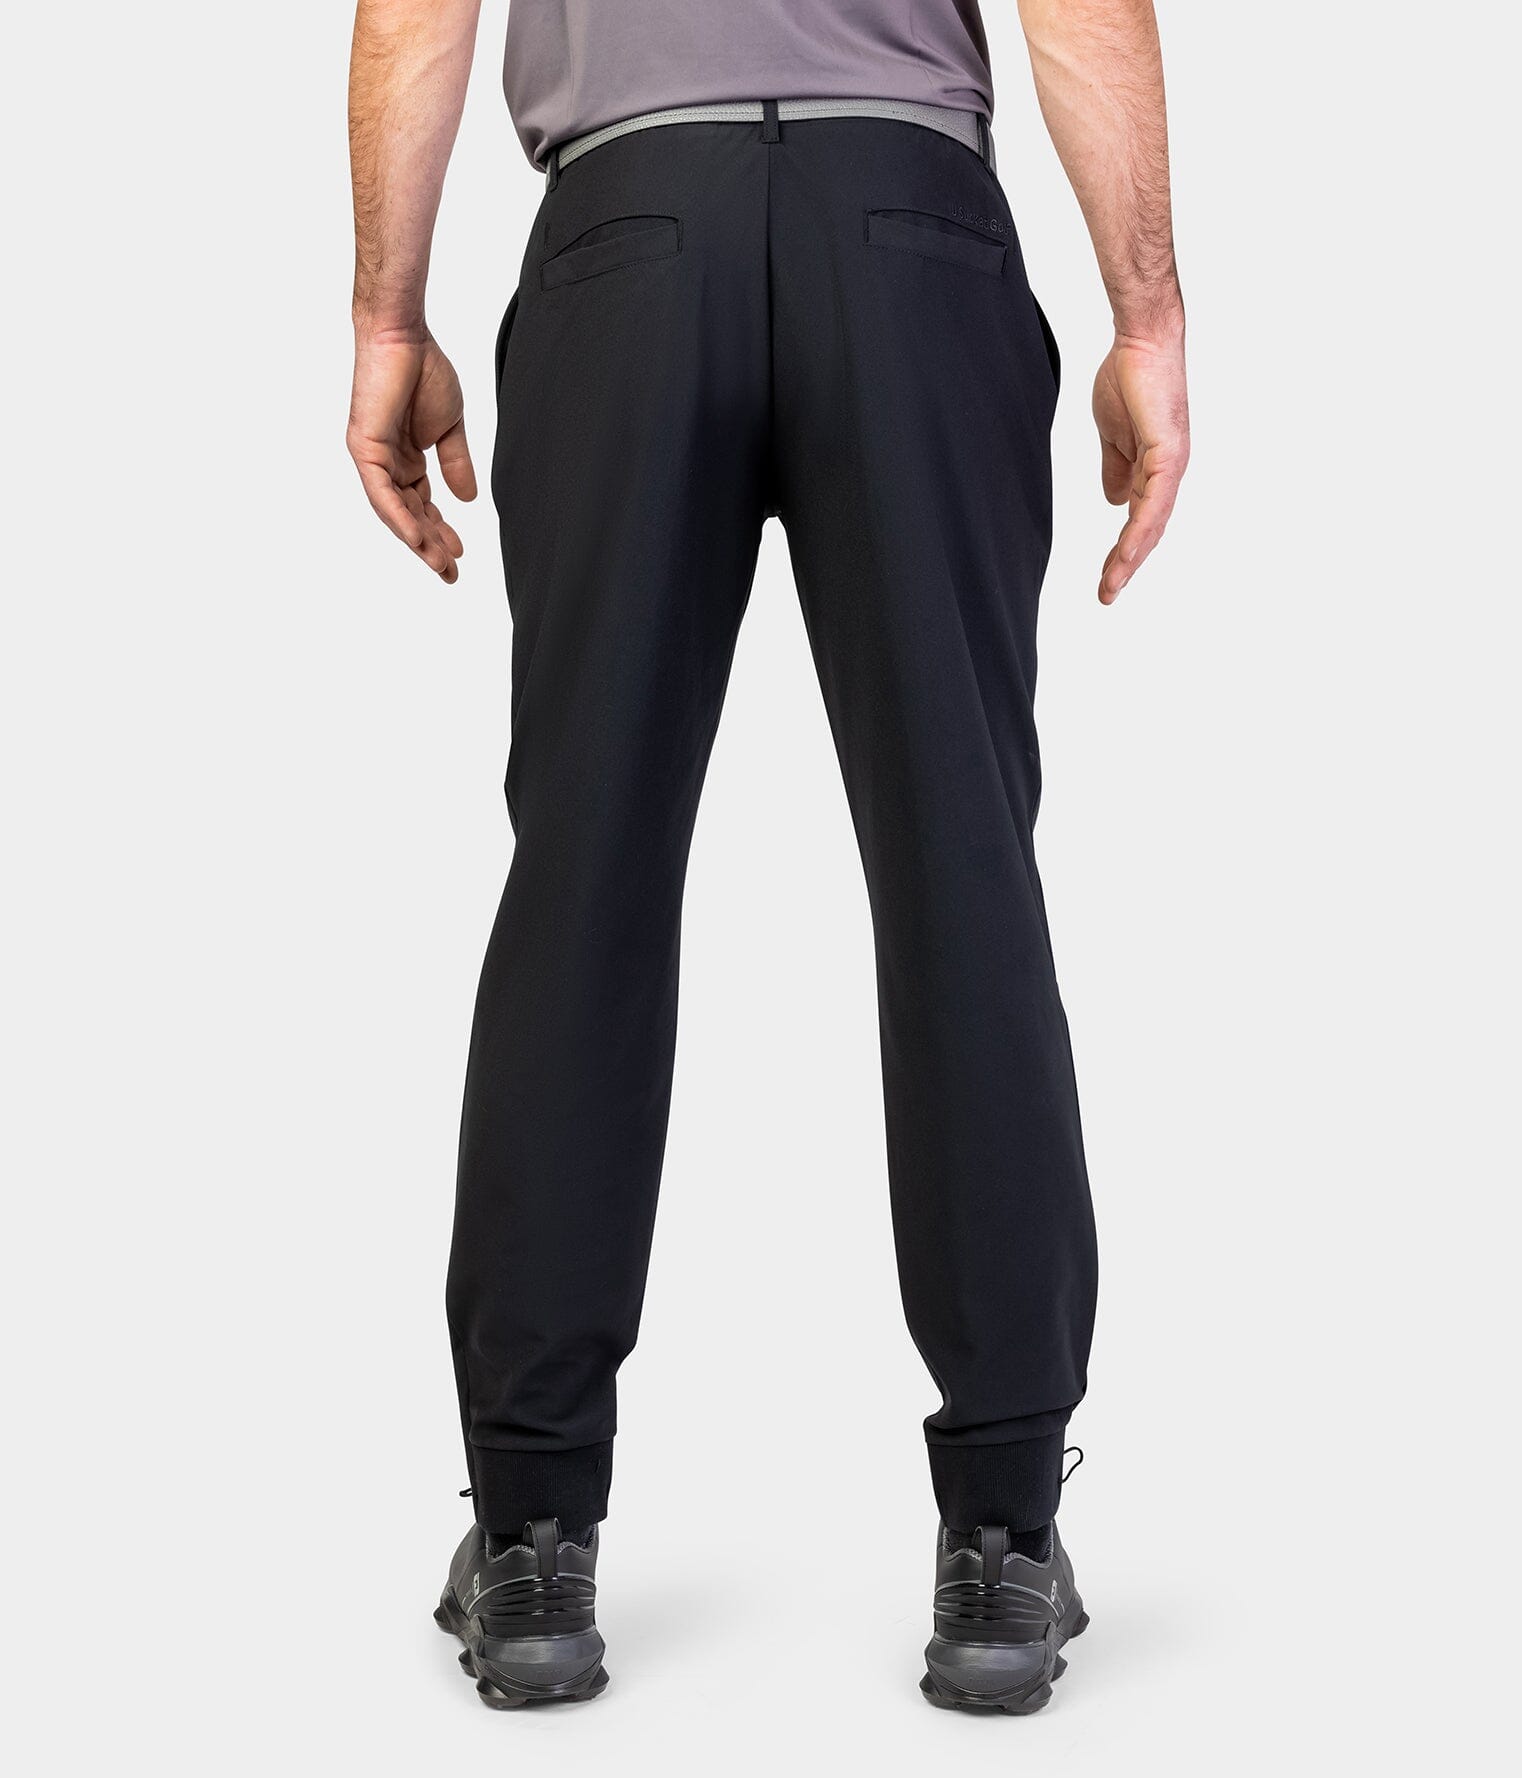 Golf Trousers - Buy Golf Trousers online in India